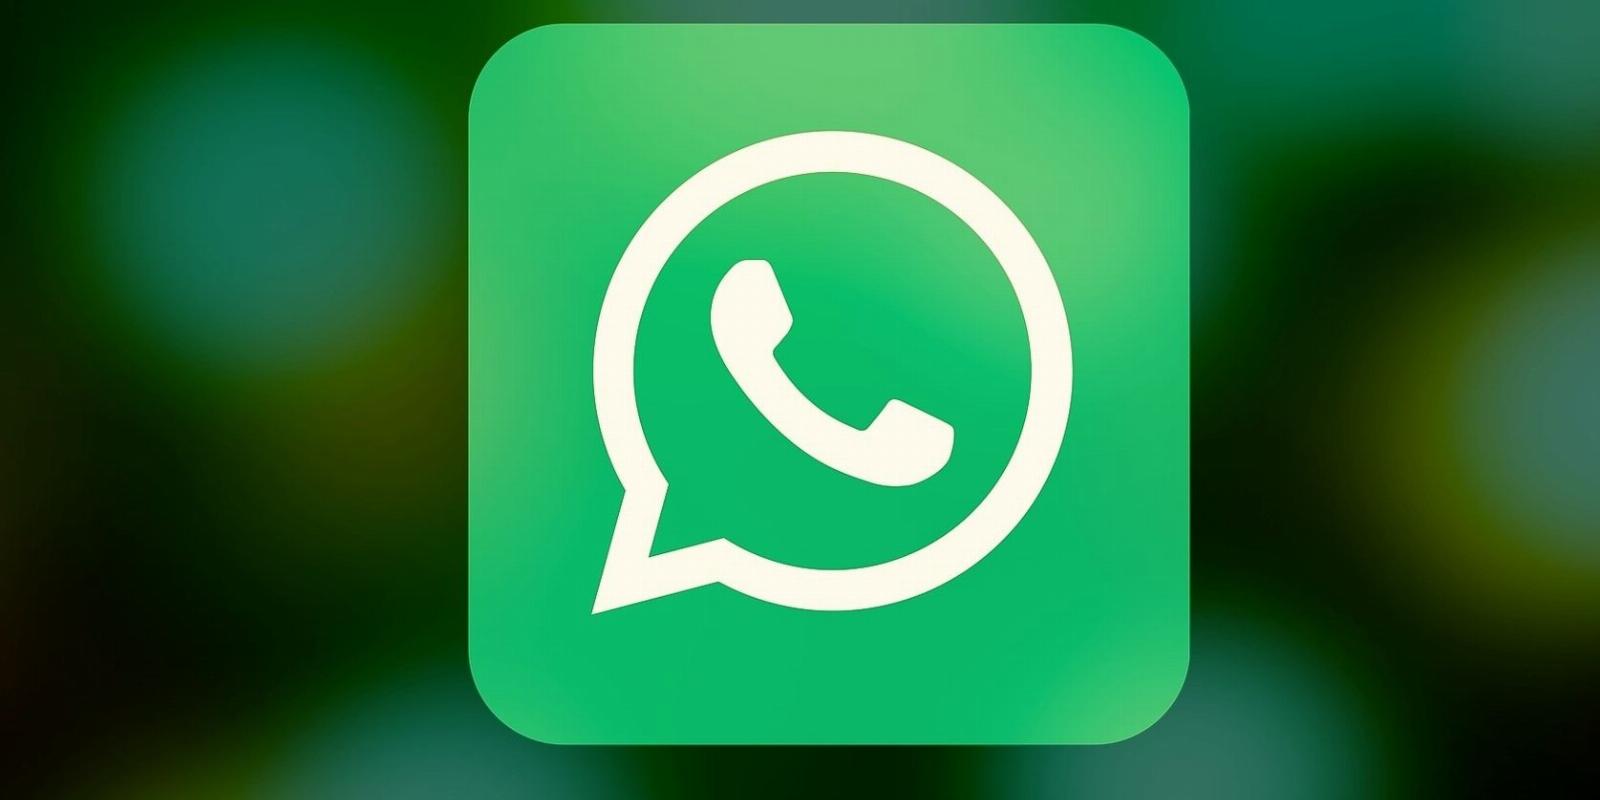 How to Add or Remove Groups From a WhatsApp Community